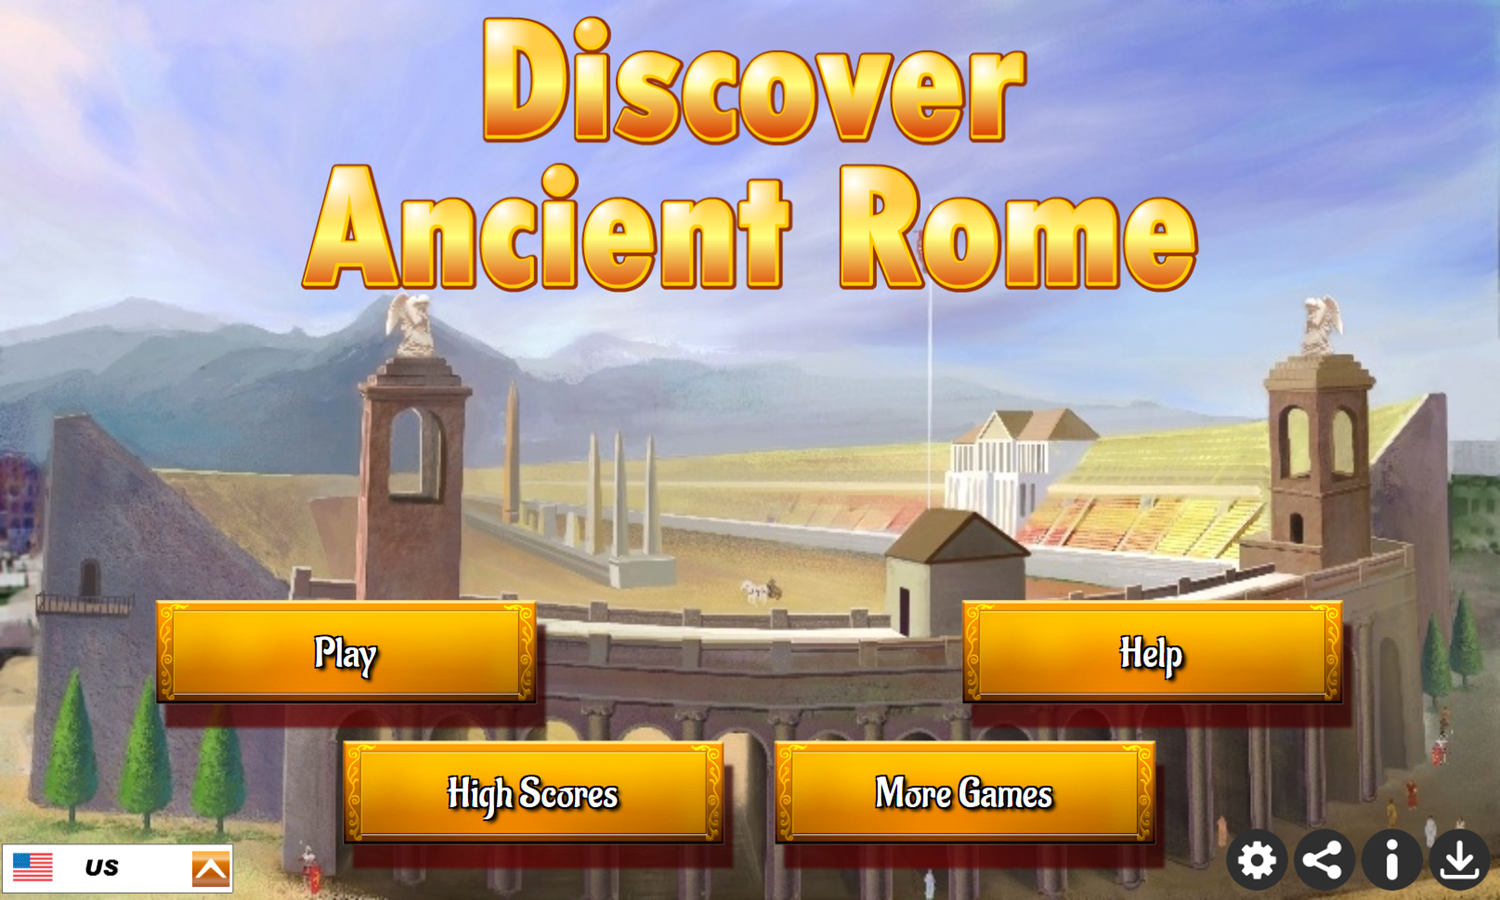 Discover Ancient Rome Game Welcome Screen Screenshot.